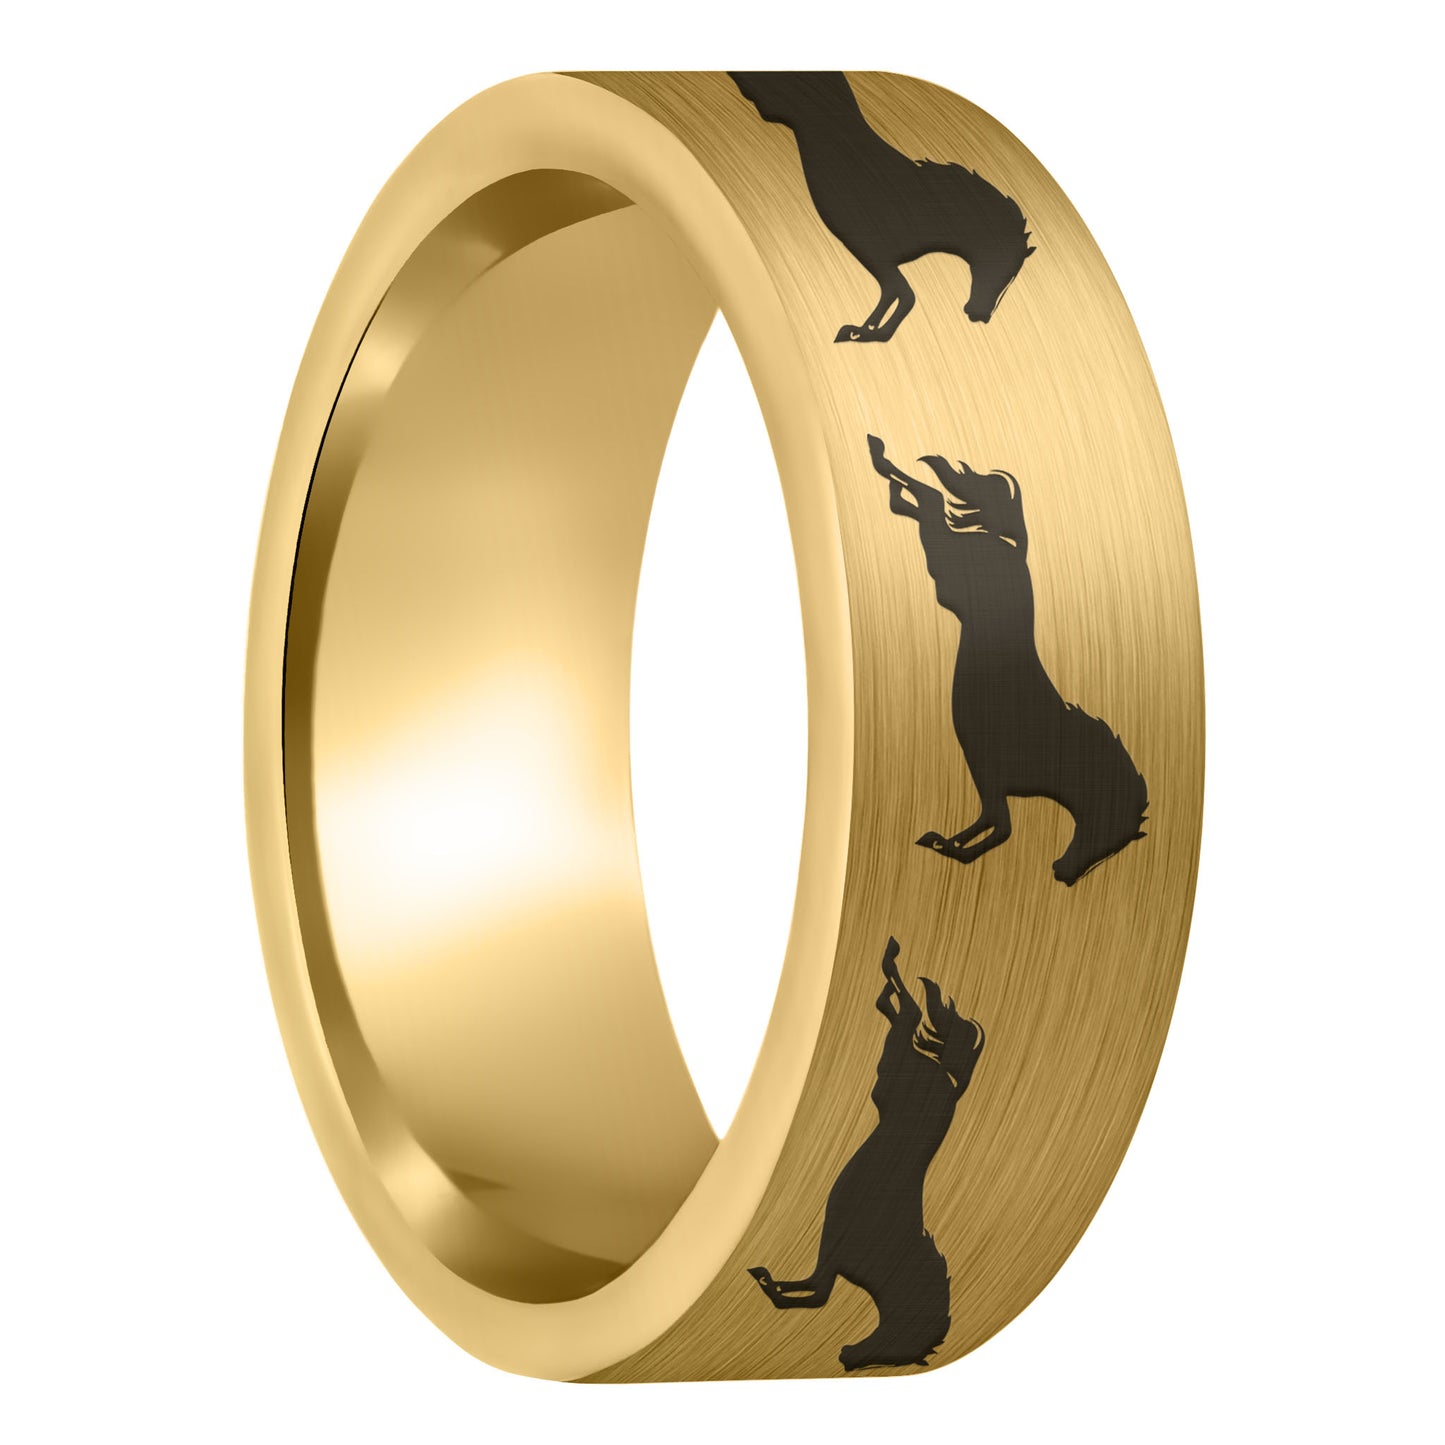 A galloping horses brushed gold tungsten men's wedding band displayed on a plain white background.